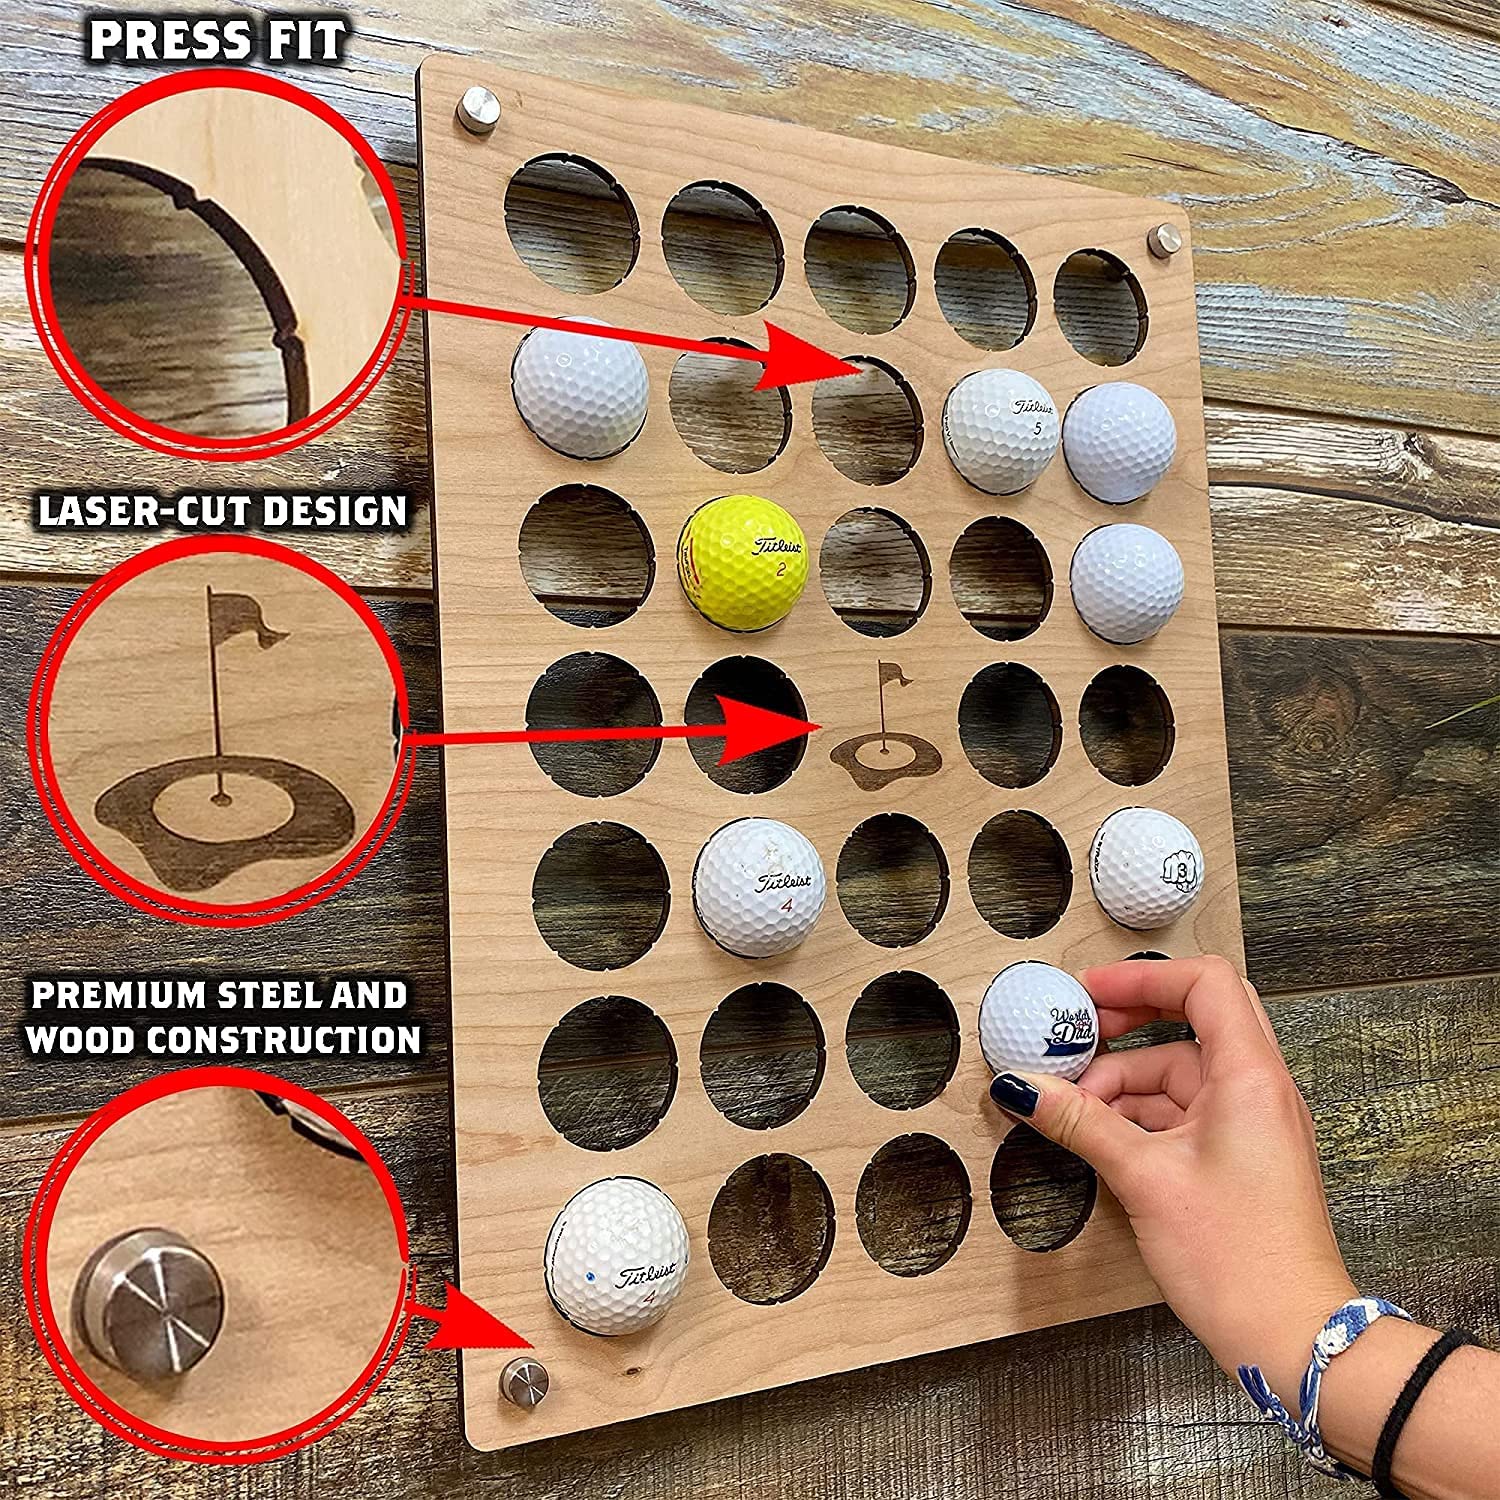 Torched Products Personalized Golf Ball Display Holder- Holds 30 Golf Balls